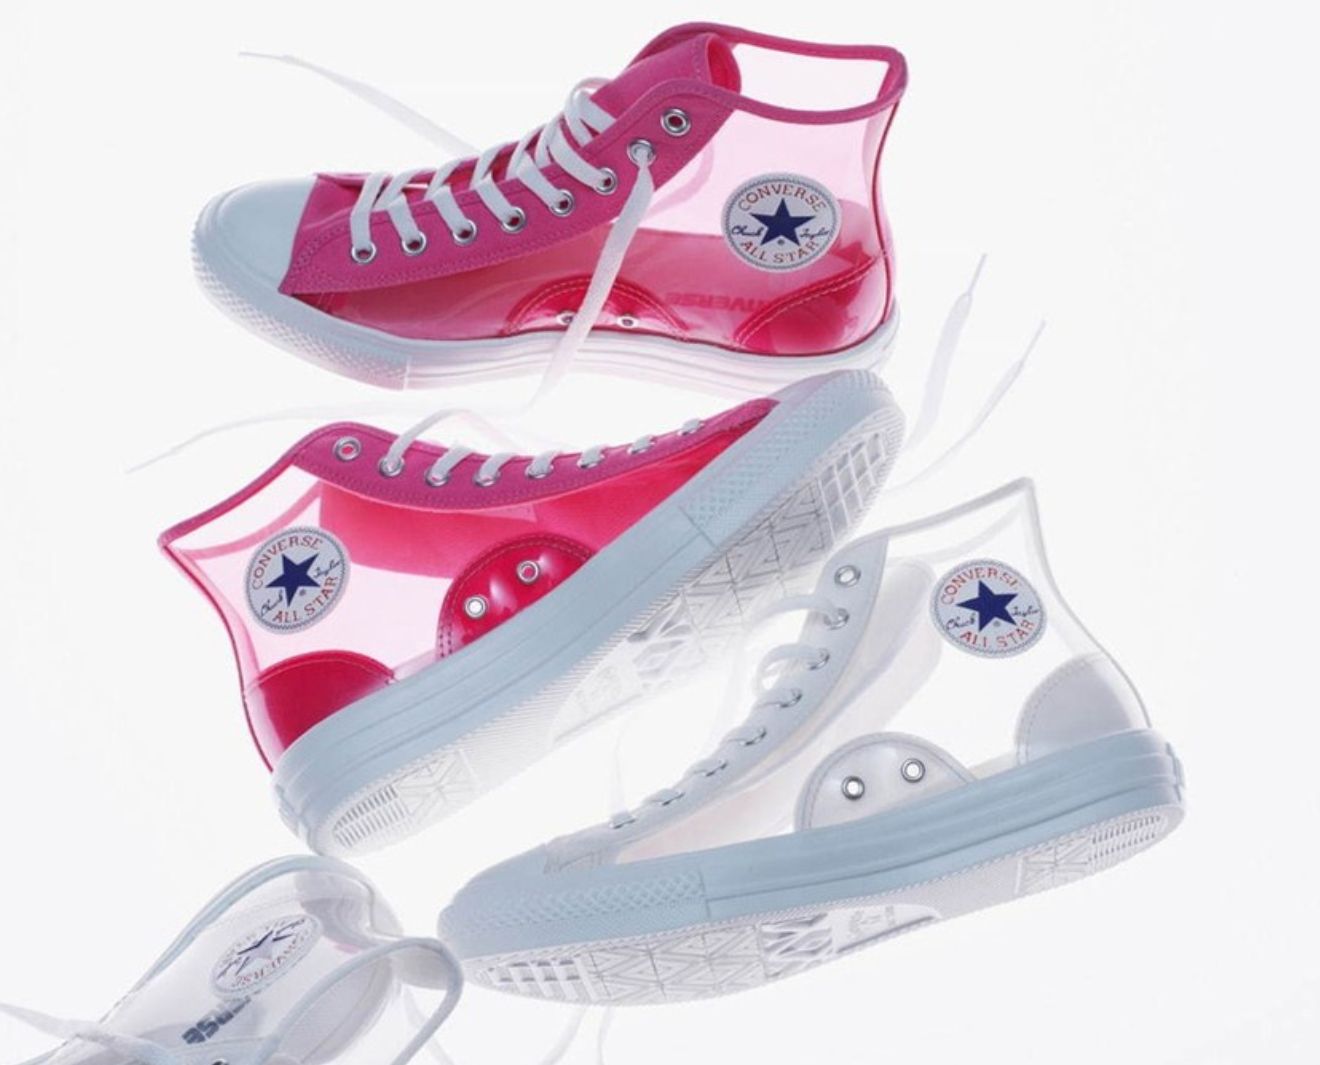 converse japan collection